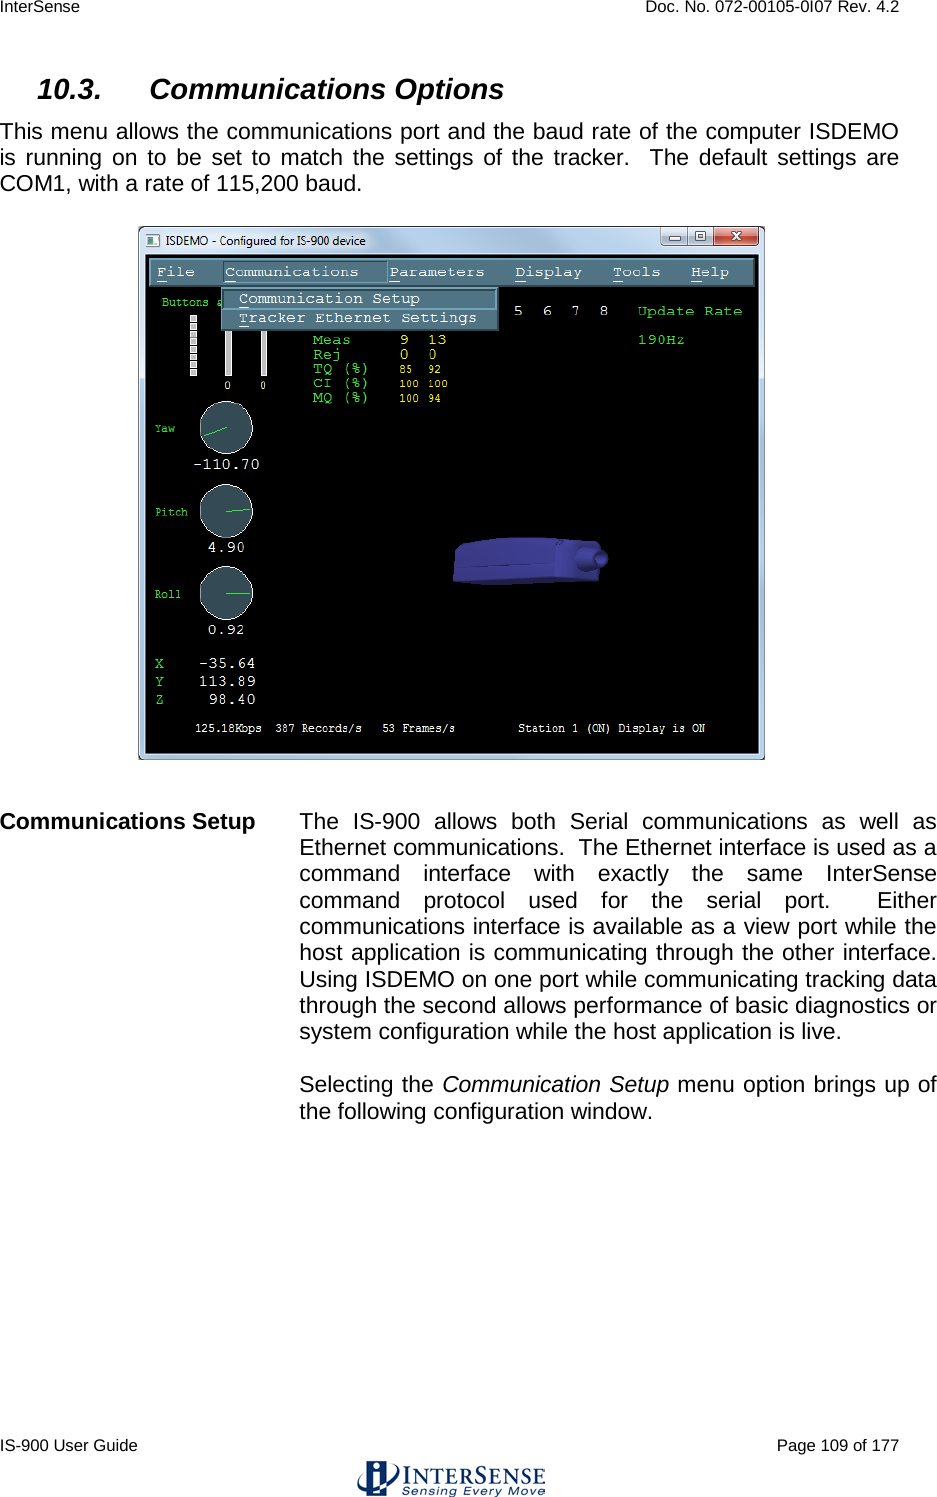 InterSense    Doc. No. 072-00105-0I07 Rev. 4.2 IS-900 User Guide                                                                                                                                          Page 109 of 177  10.3. Communications Options This menu allows the communications port and the baud rate of the computer ISDEMO is running on to be set to match the settings of the tracker.  The default settings are COM1, with a rate of 115,200 baud.   Communications Setup  The IS-900 allows both Serial communications as well as Ethernet communications.  The Ethernet interface is used as a command interface with exactly the same InterSense command protocol used for the serial port.  Either communications interface is available as a view port while the host application is communicating through the other interface.  Using ISDEMO on one port while communicating tracking data through the second allows performance of basic diagnostics or system configuration while the host application is live.  Selecting the Communication Setup menu option brings up of the following configuration window.      